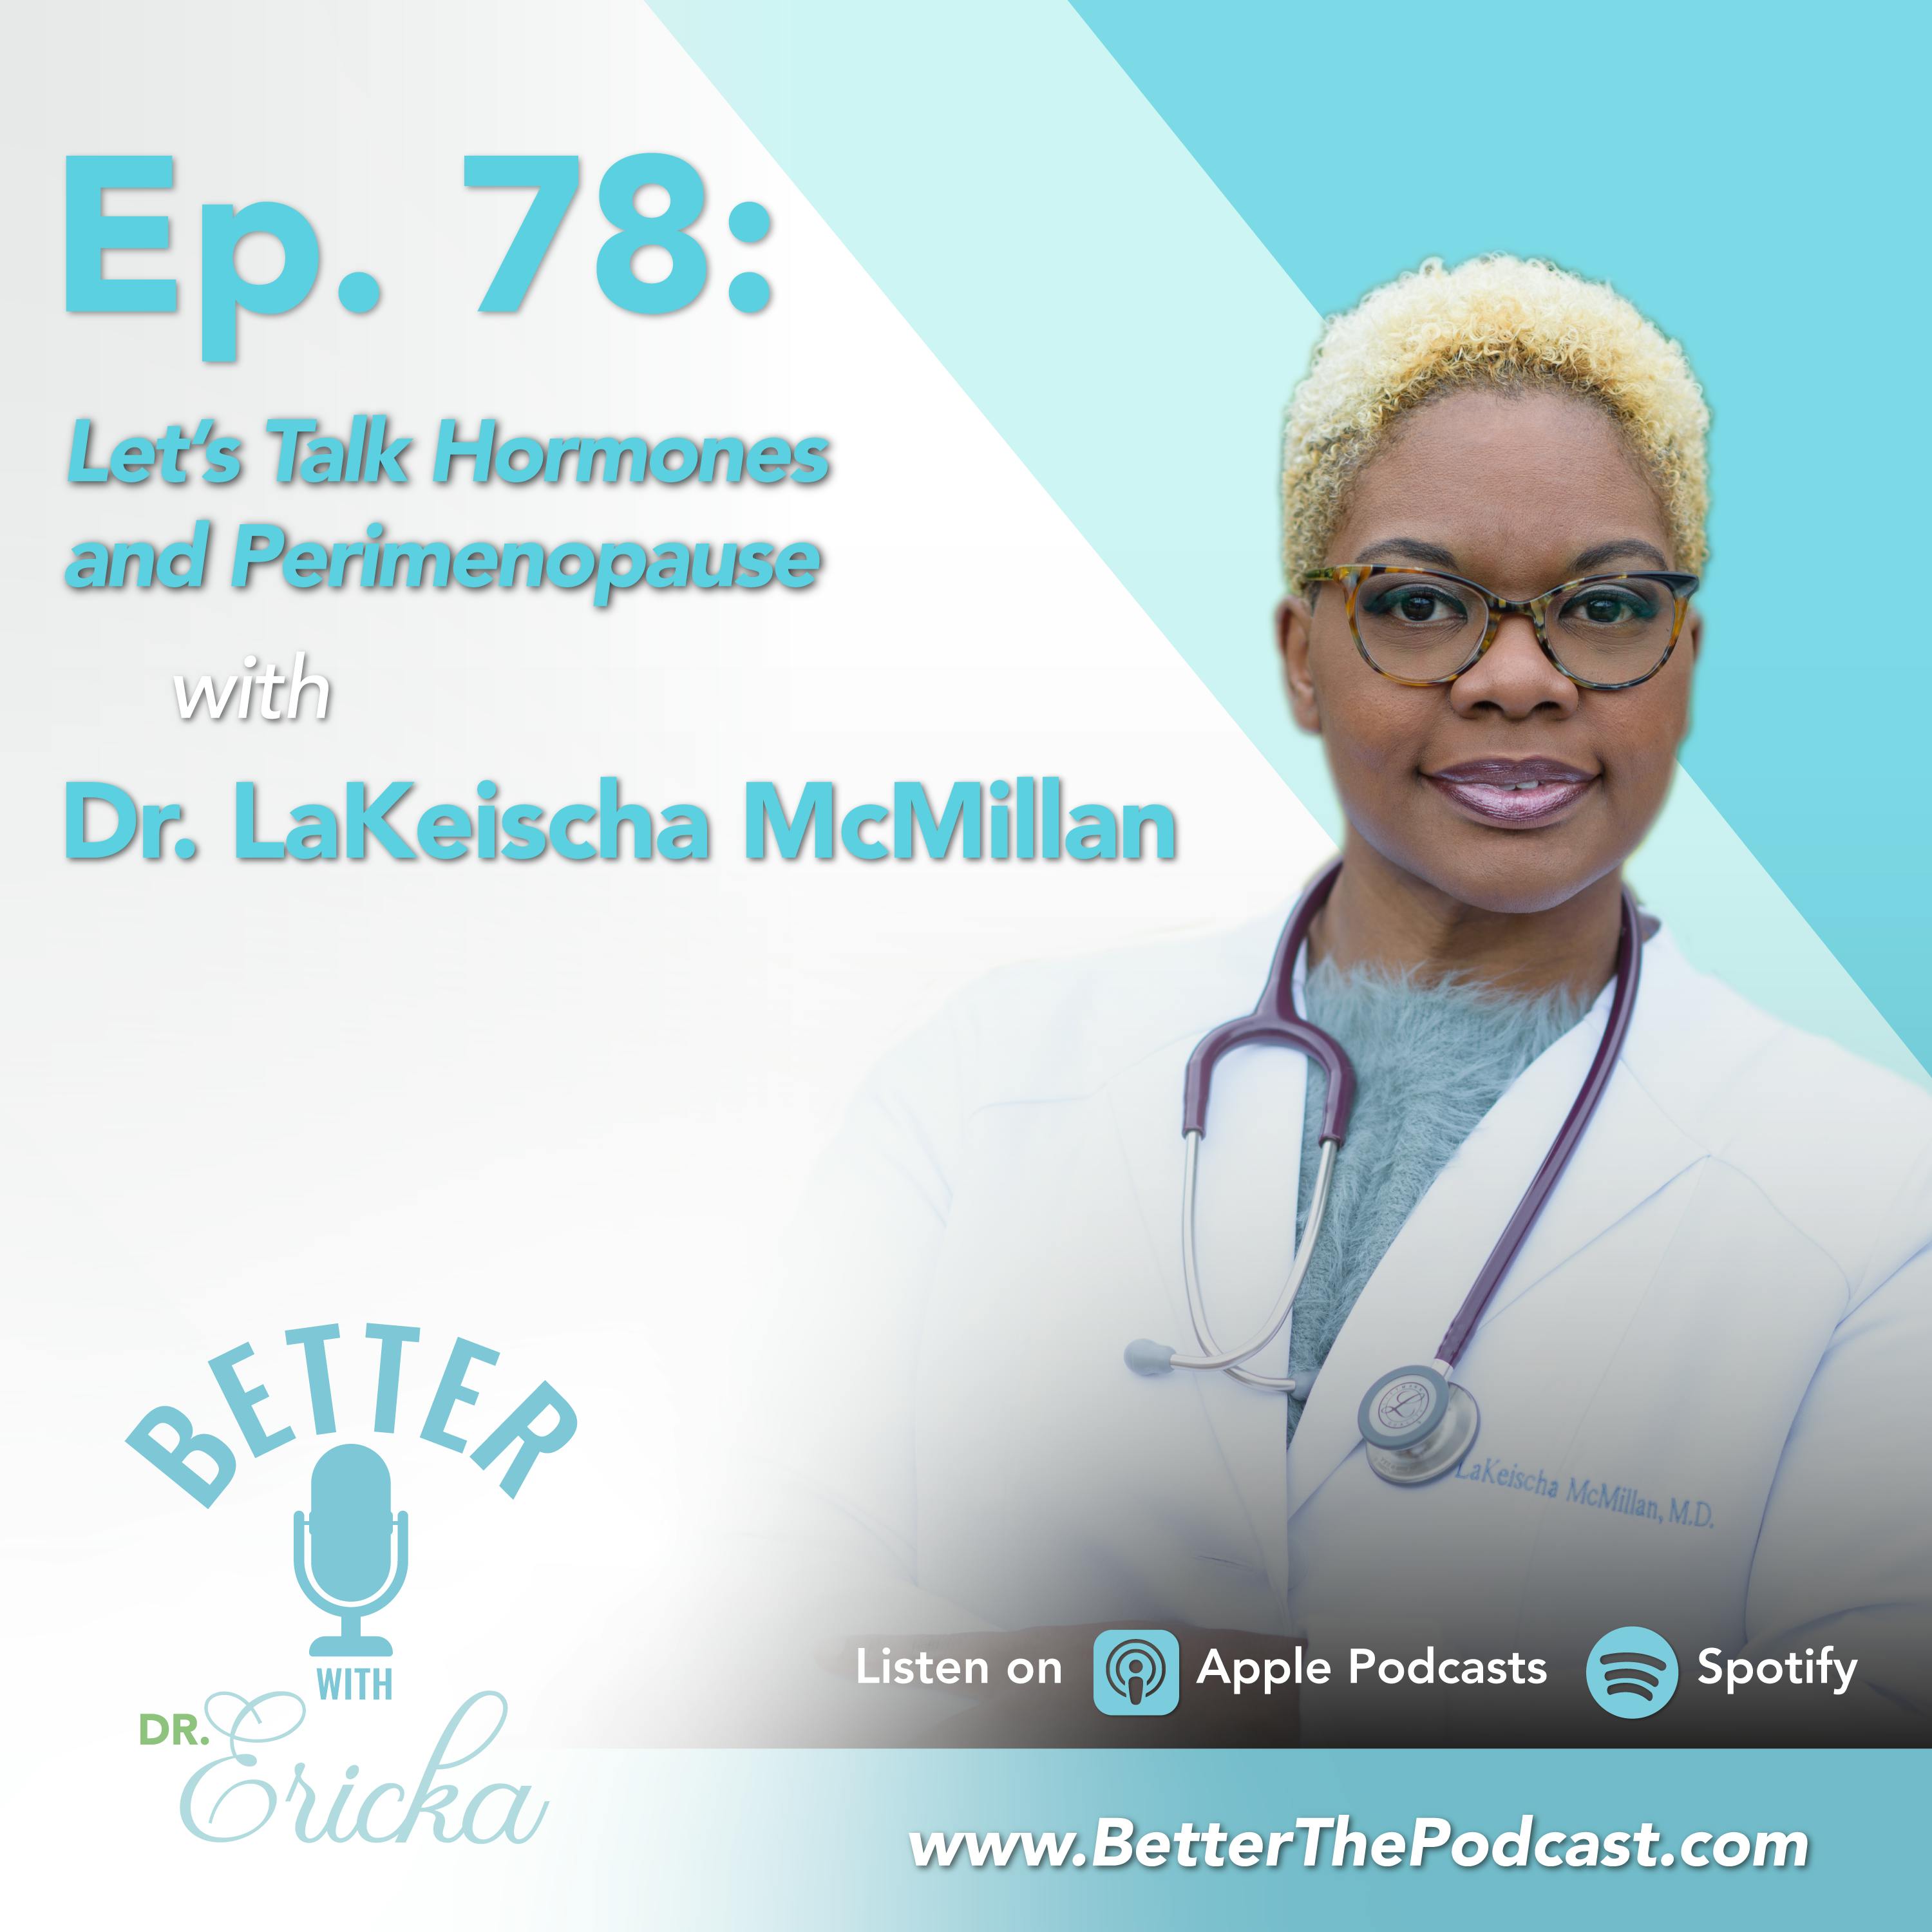 Let’s Talk Hormones and Perimenopause with Dr. LaKeischa McMillan